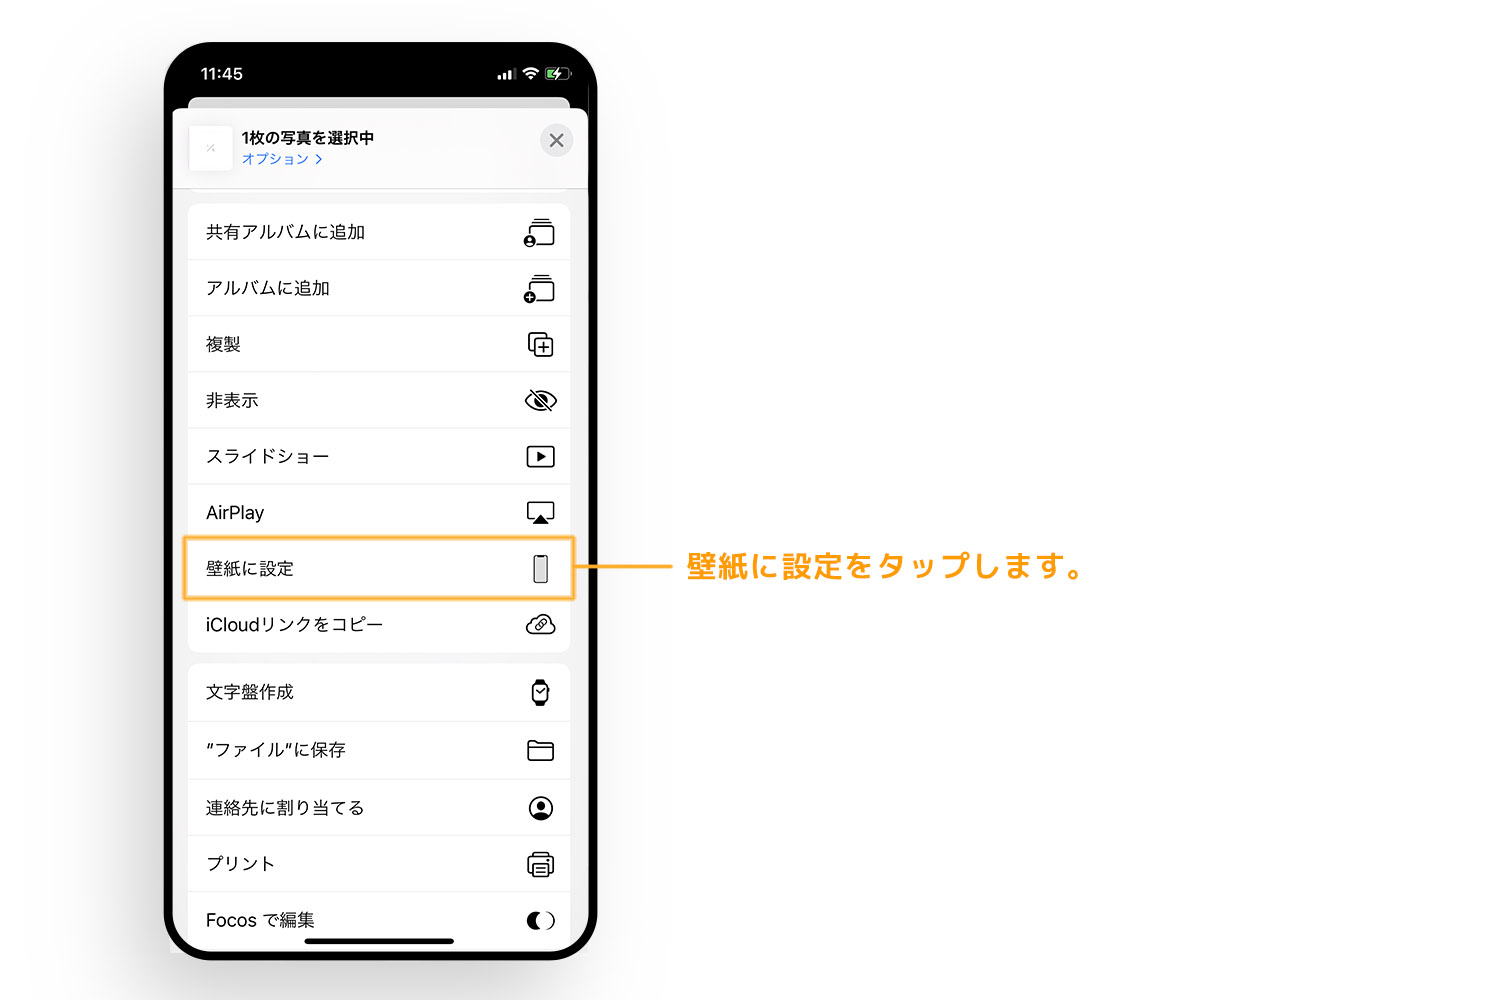 Iphone用ロック画面壁紙 Iphone Scale の購入 設定方法について Navynote